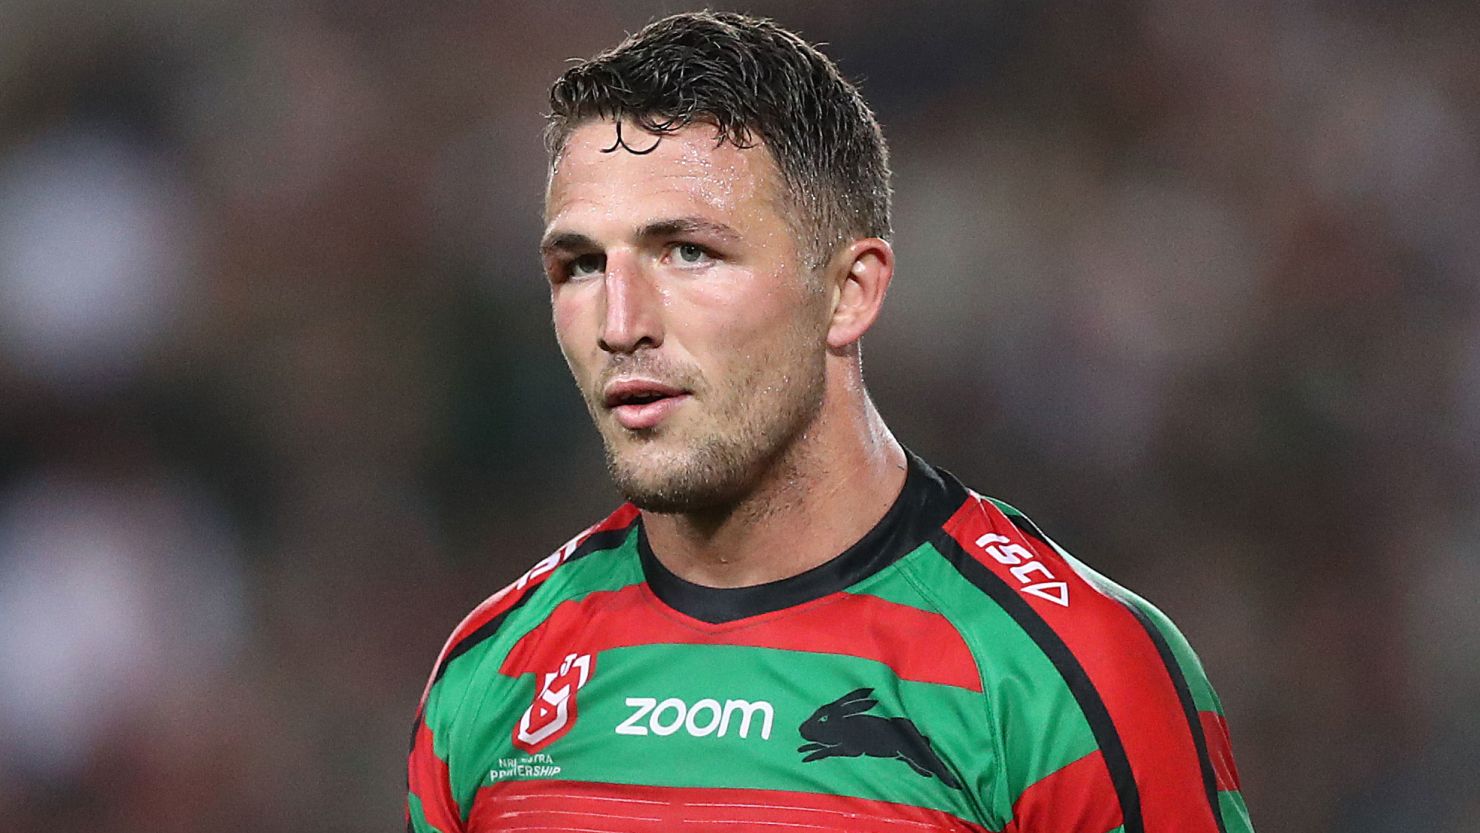 Sam Burgess retired in 2019 and took up a coaching role with the South Sydney Rabbitohs. 